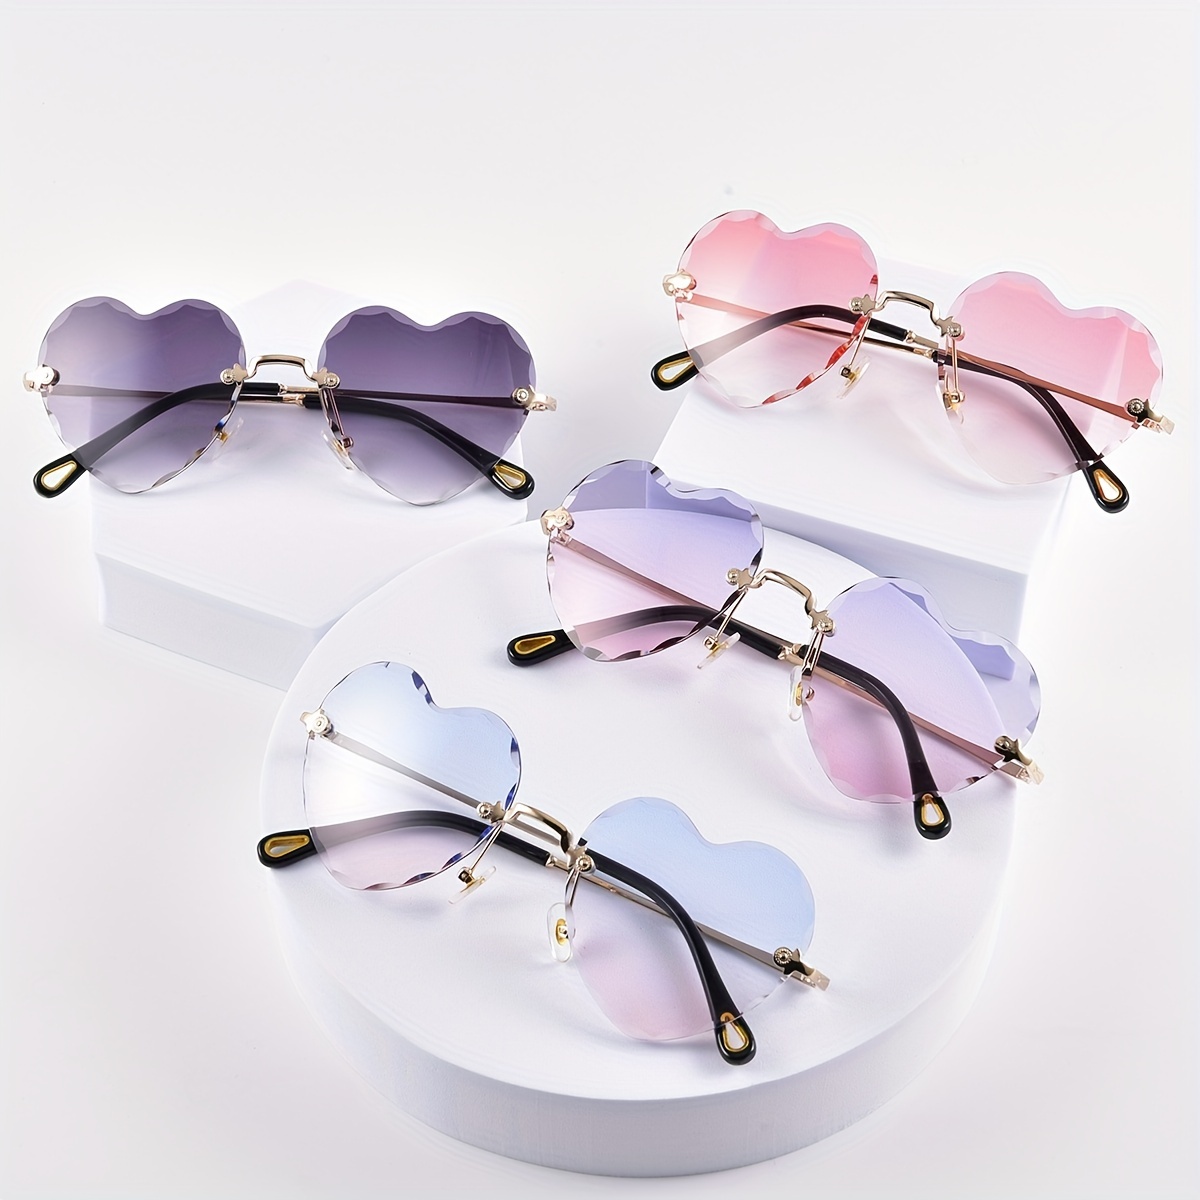 

Heart Shaped Rimless Sunglasses For Women Ombre Gradient Lens Decorative Sun Shades For Vacation Beach Party Fashion Glasses